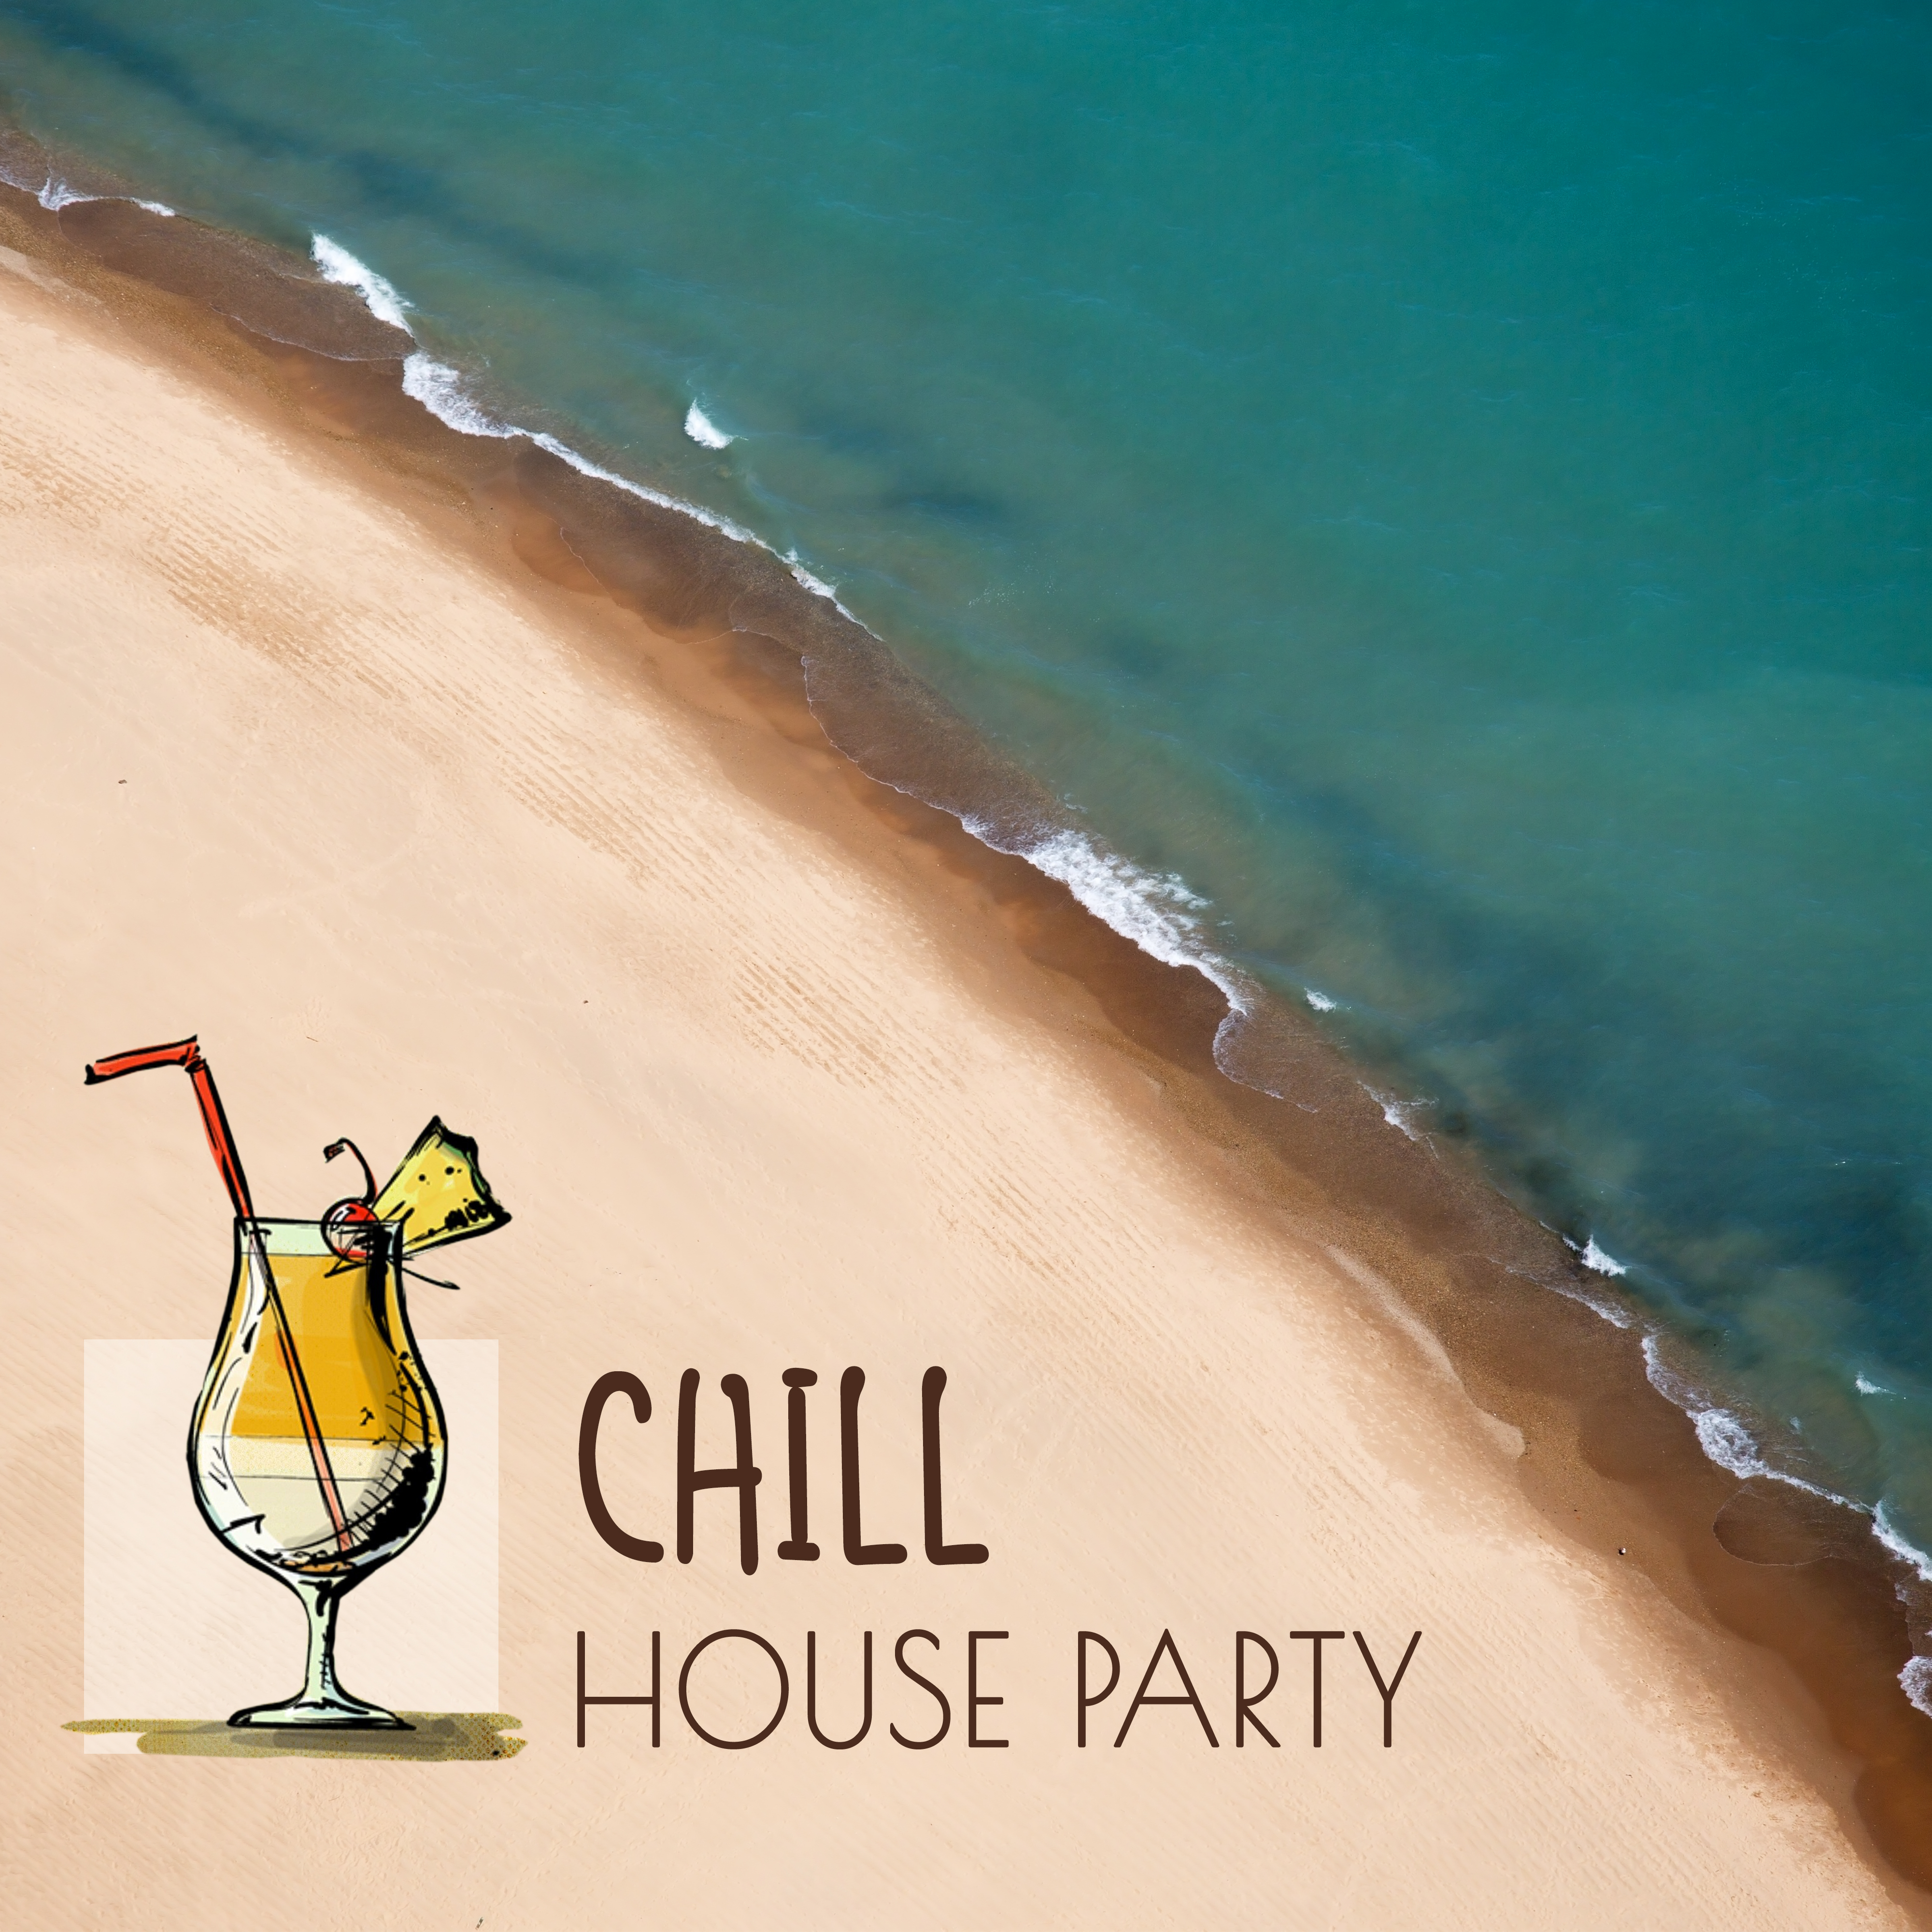 Chill House Party  Chill Out Music, Party Time, Have Fun in Home